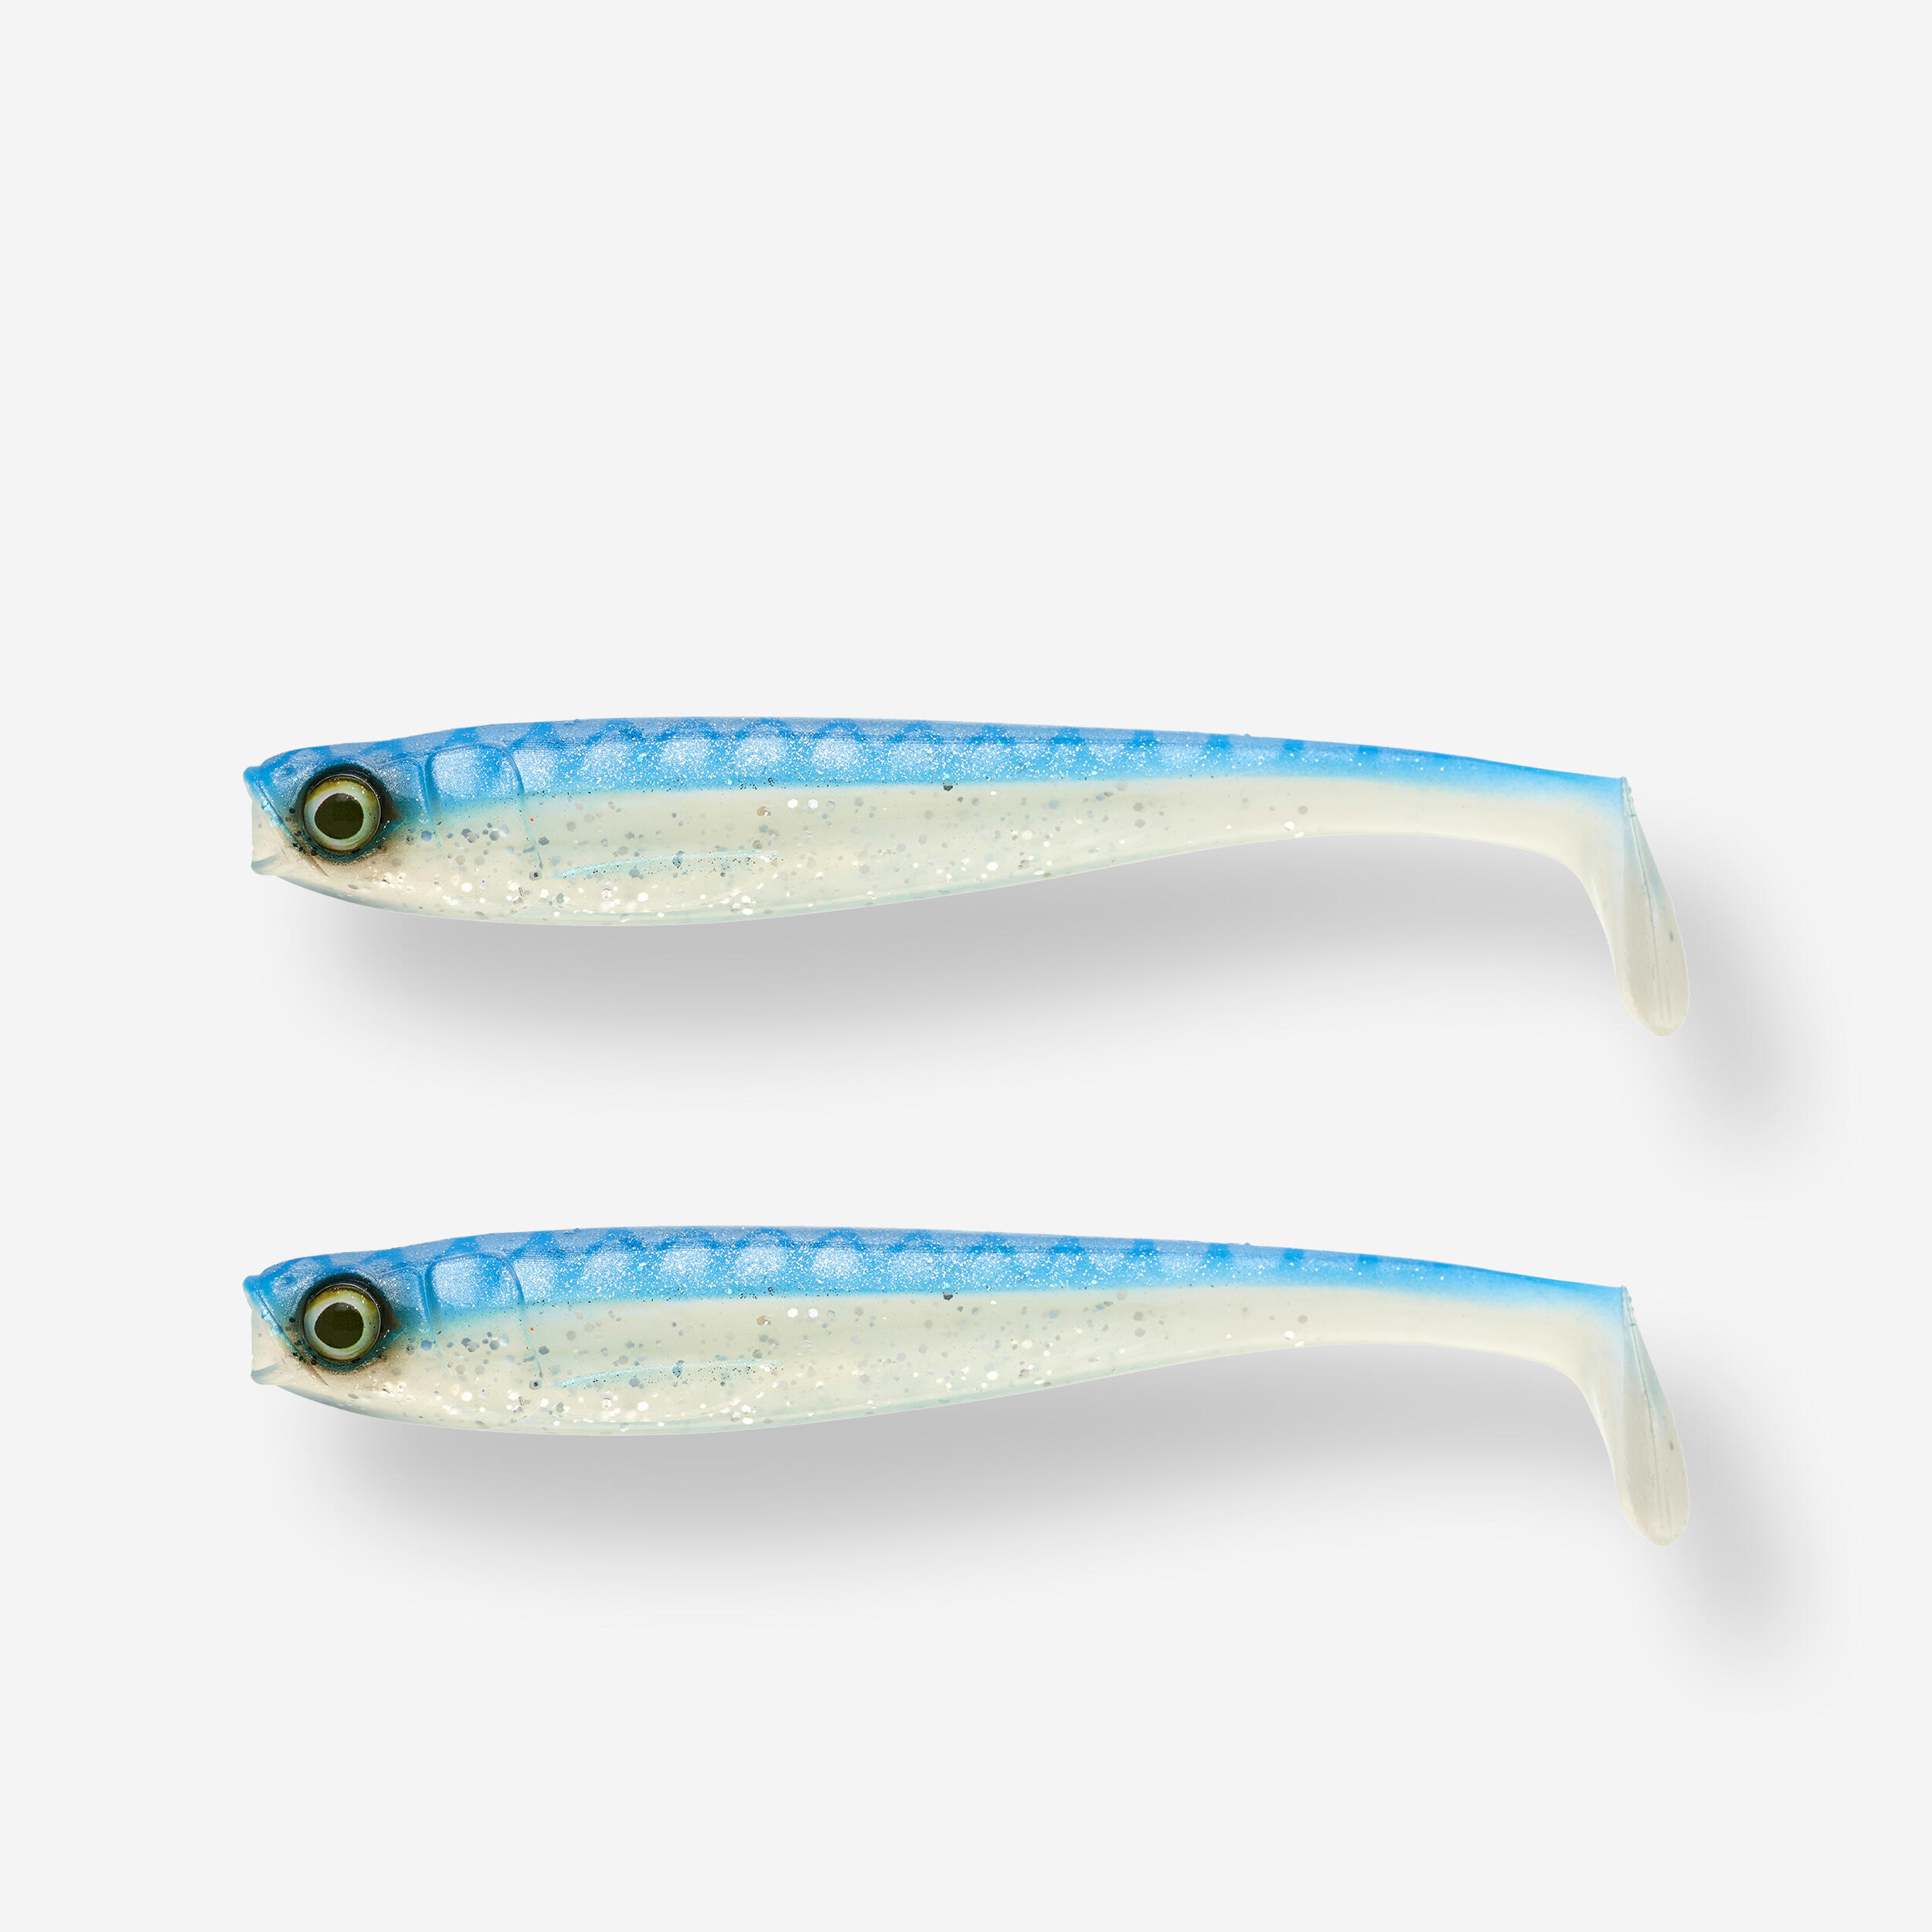 ROGEN SOFT SHAD PIKE LURE 120 BLUE X2 1/3